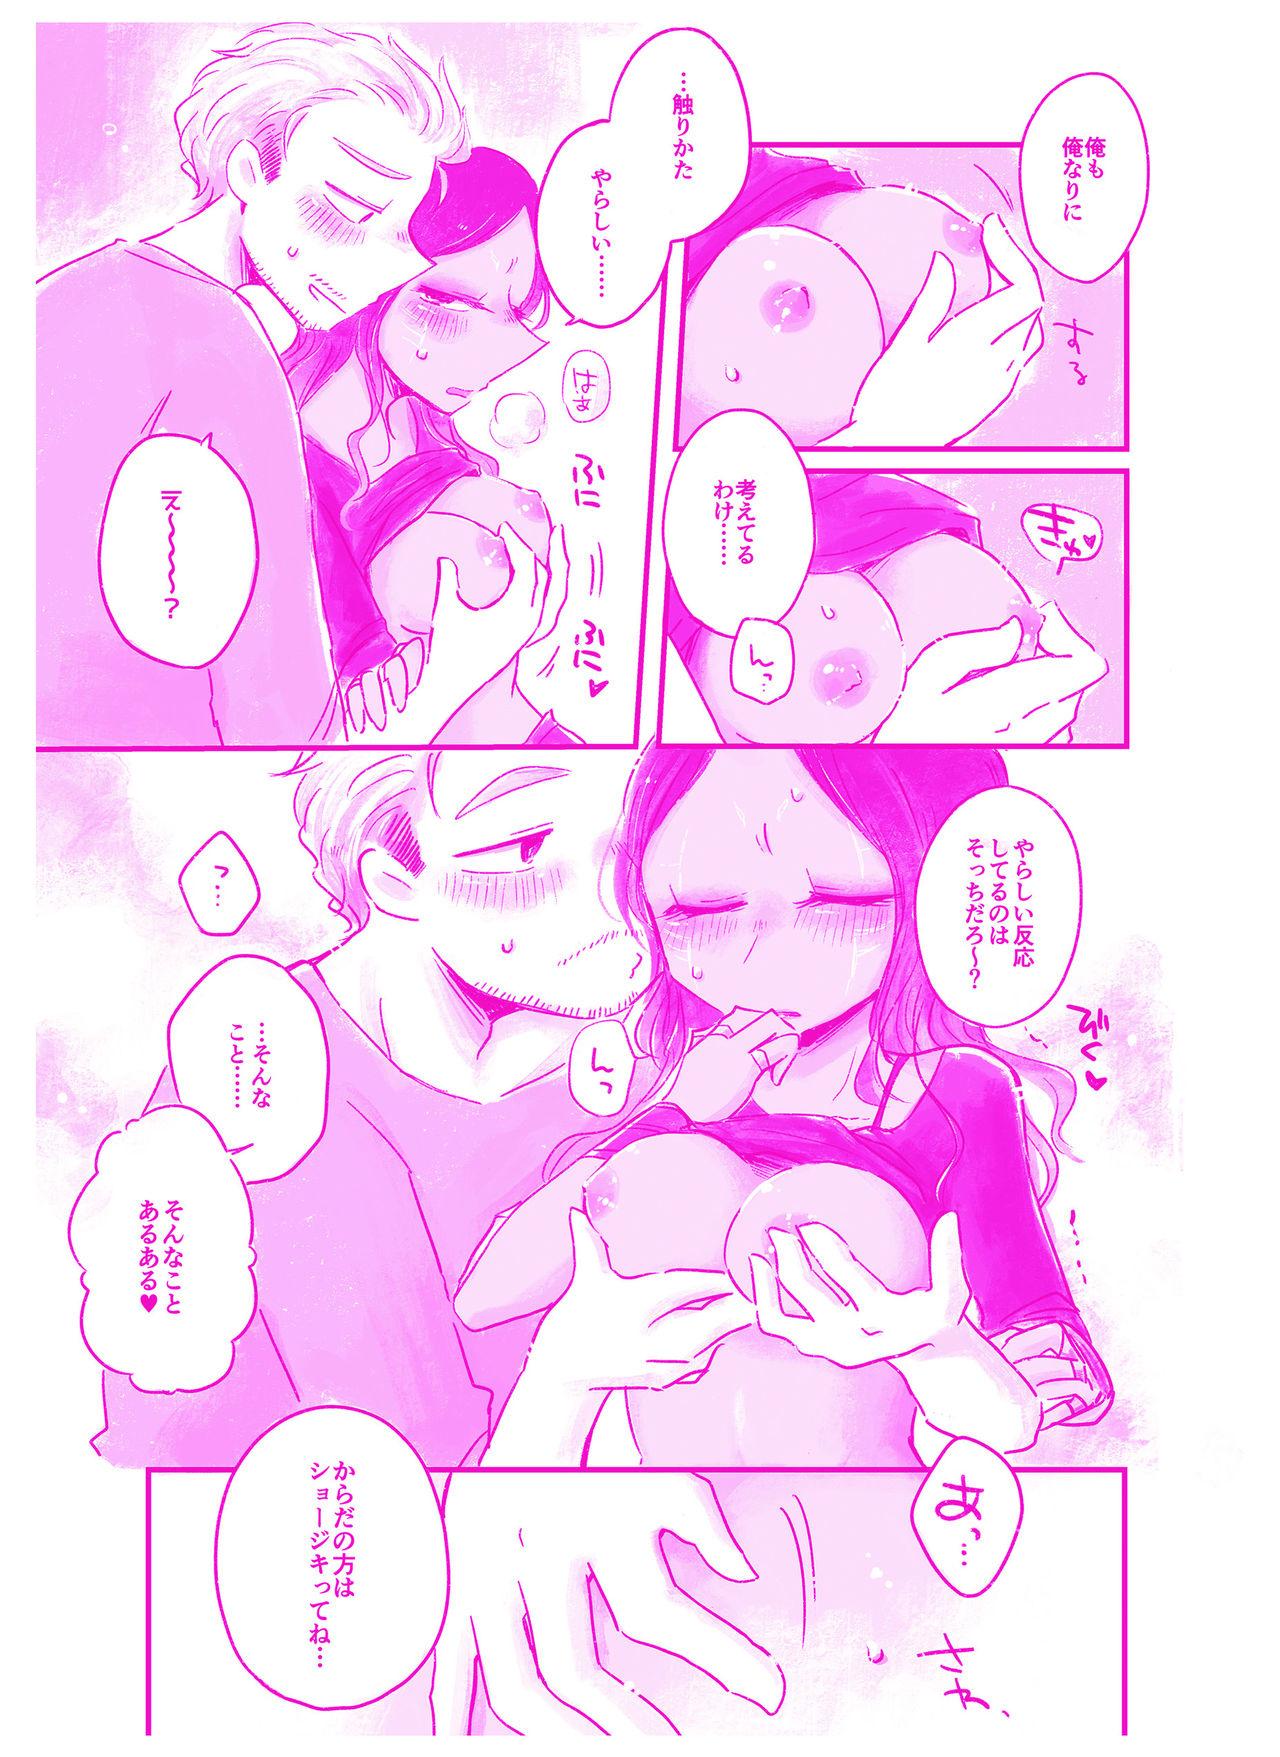 Dicksucking 言われてみてえもんだ - Guardians of the galaxy Cumswallow - Page 6